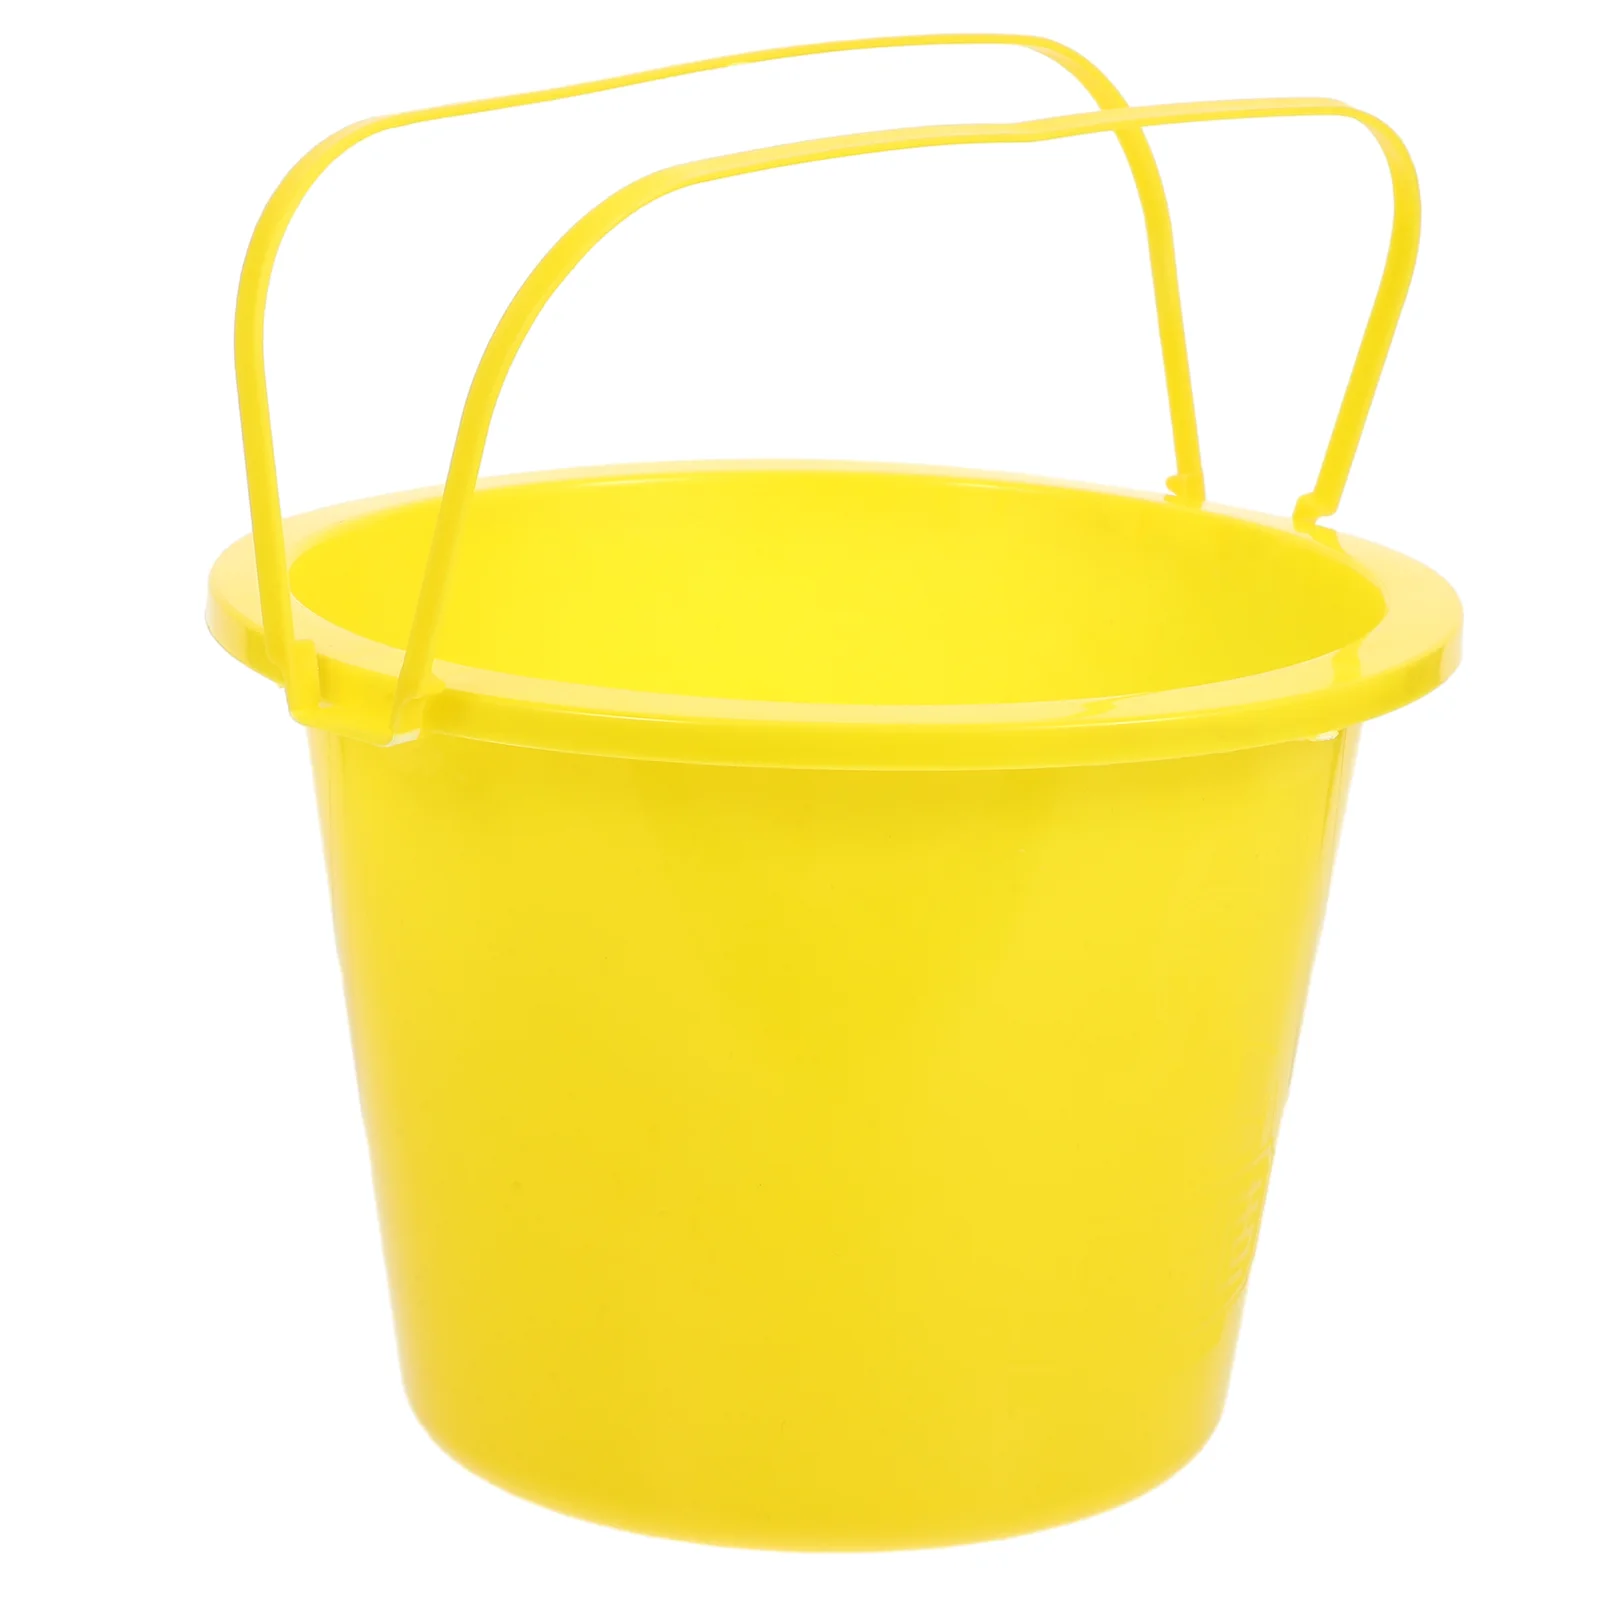 

Empty Paint Bucket Favor Containers Paints Container with Handle Painting Varnish Storage Bucket Portable Paint